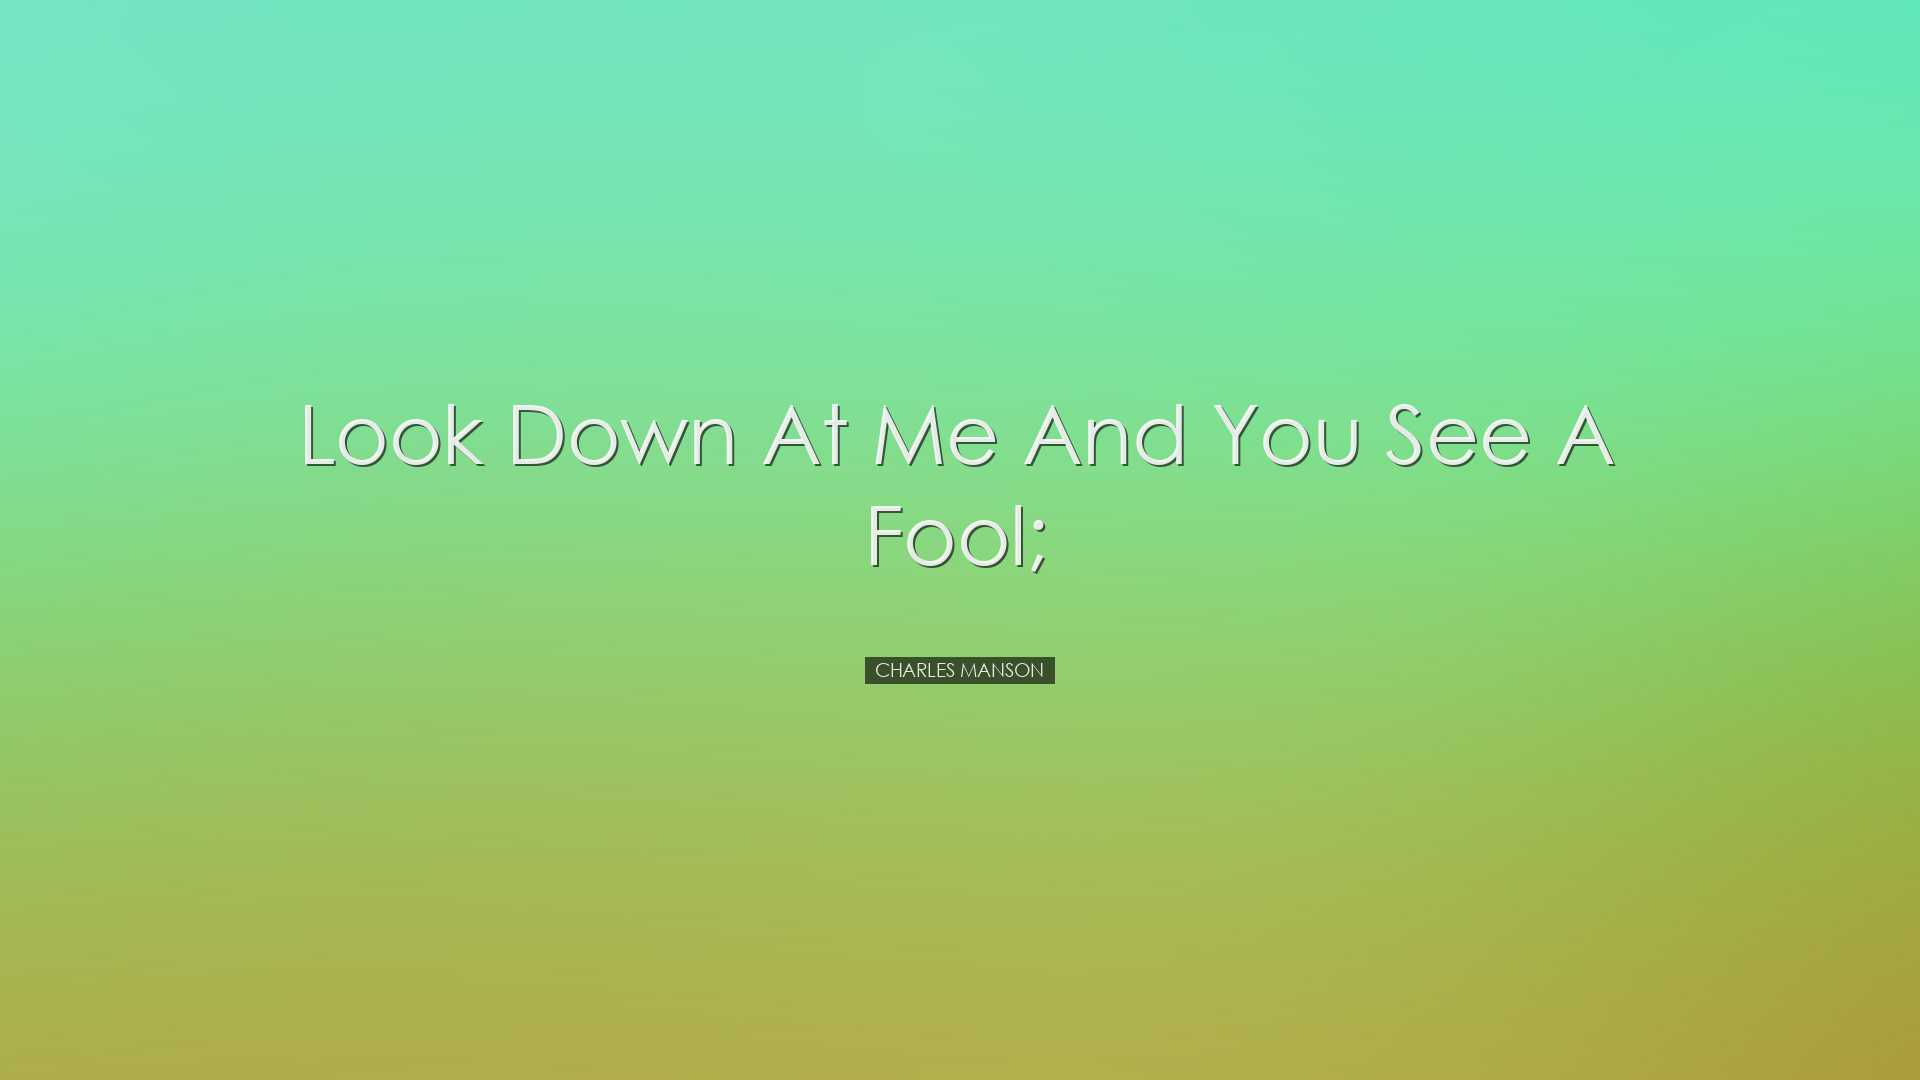 Look down at me and you see a fool; - Charles Manson